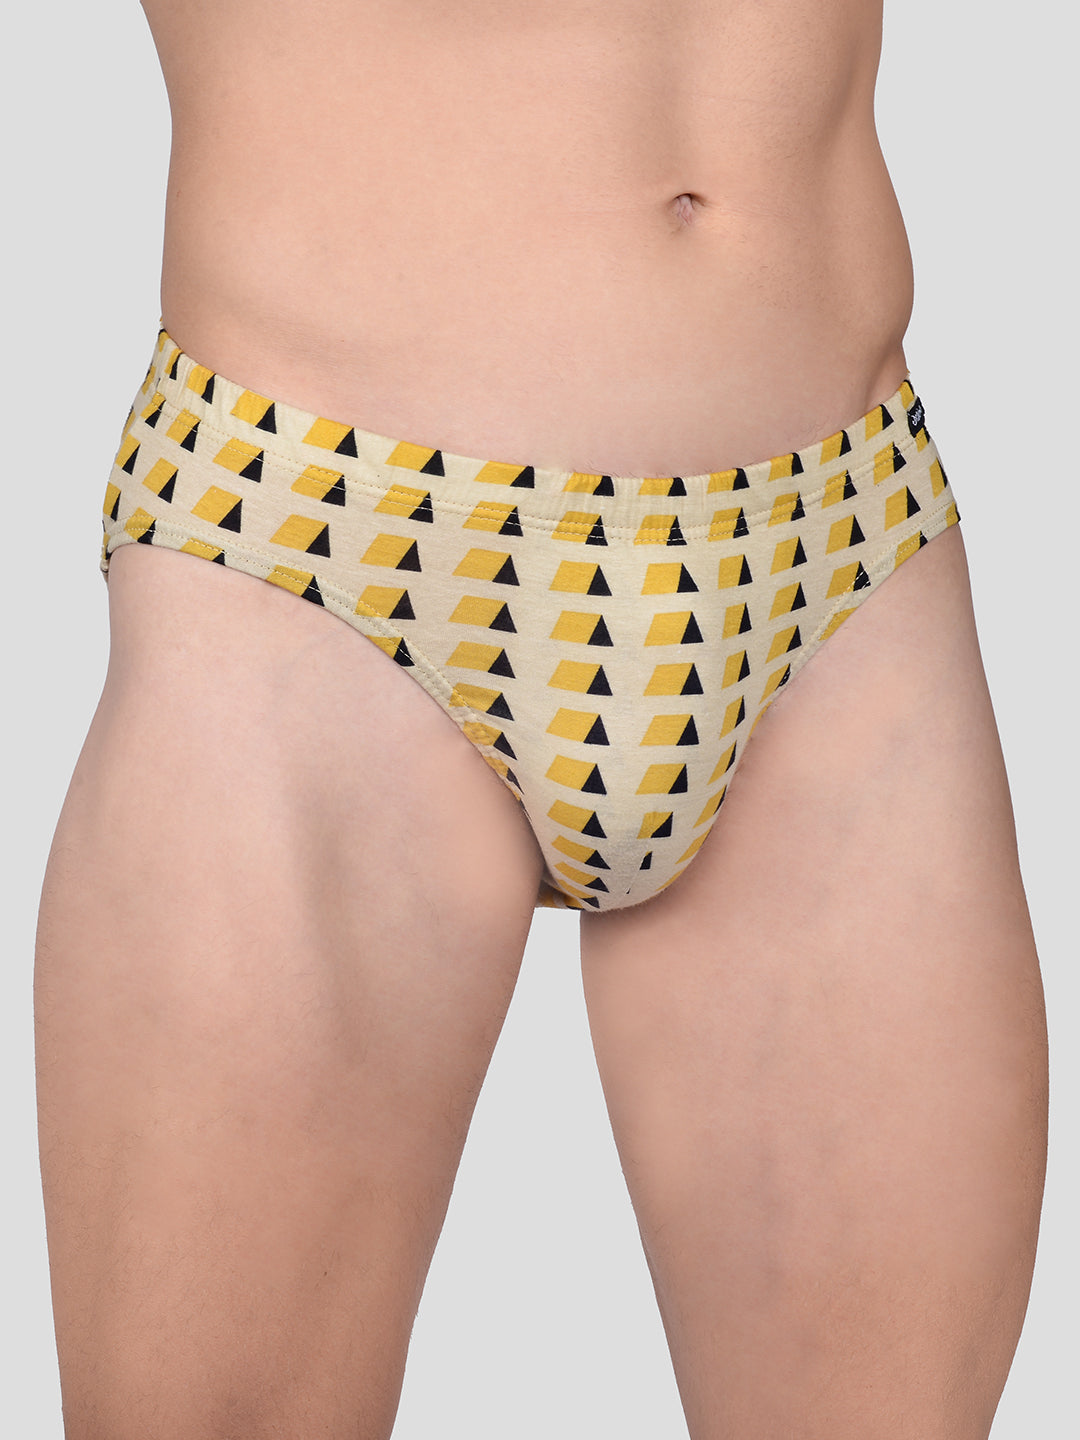 Buy Frenchie Men's Cotton Briefs (Pack of 5) (Envy_Color May